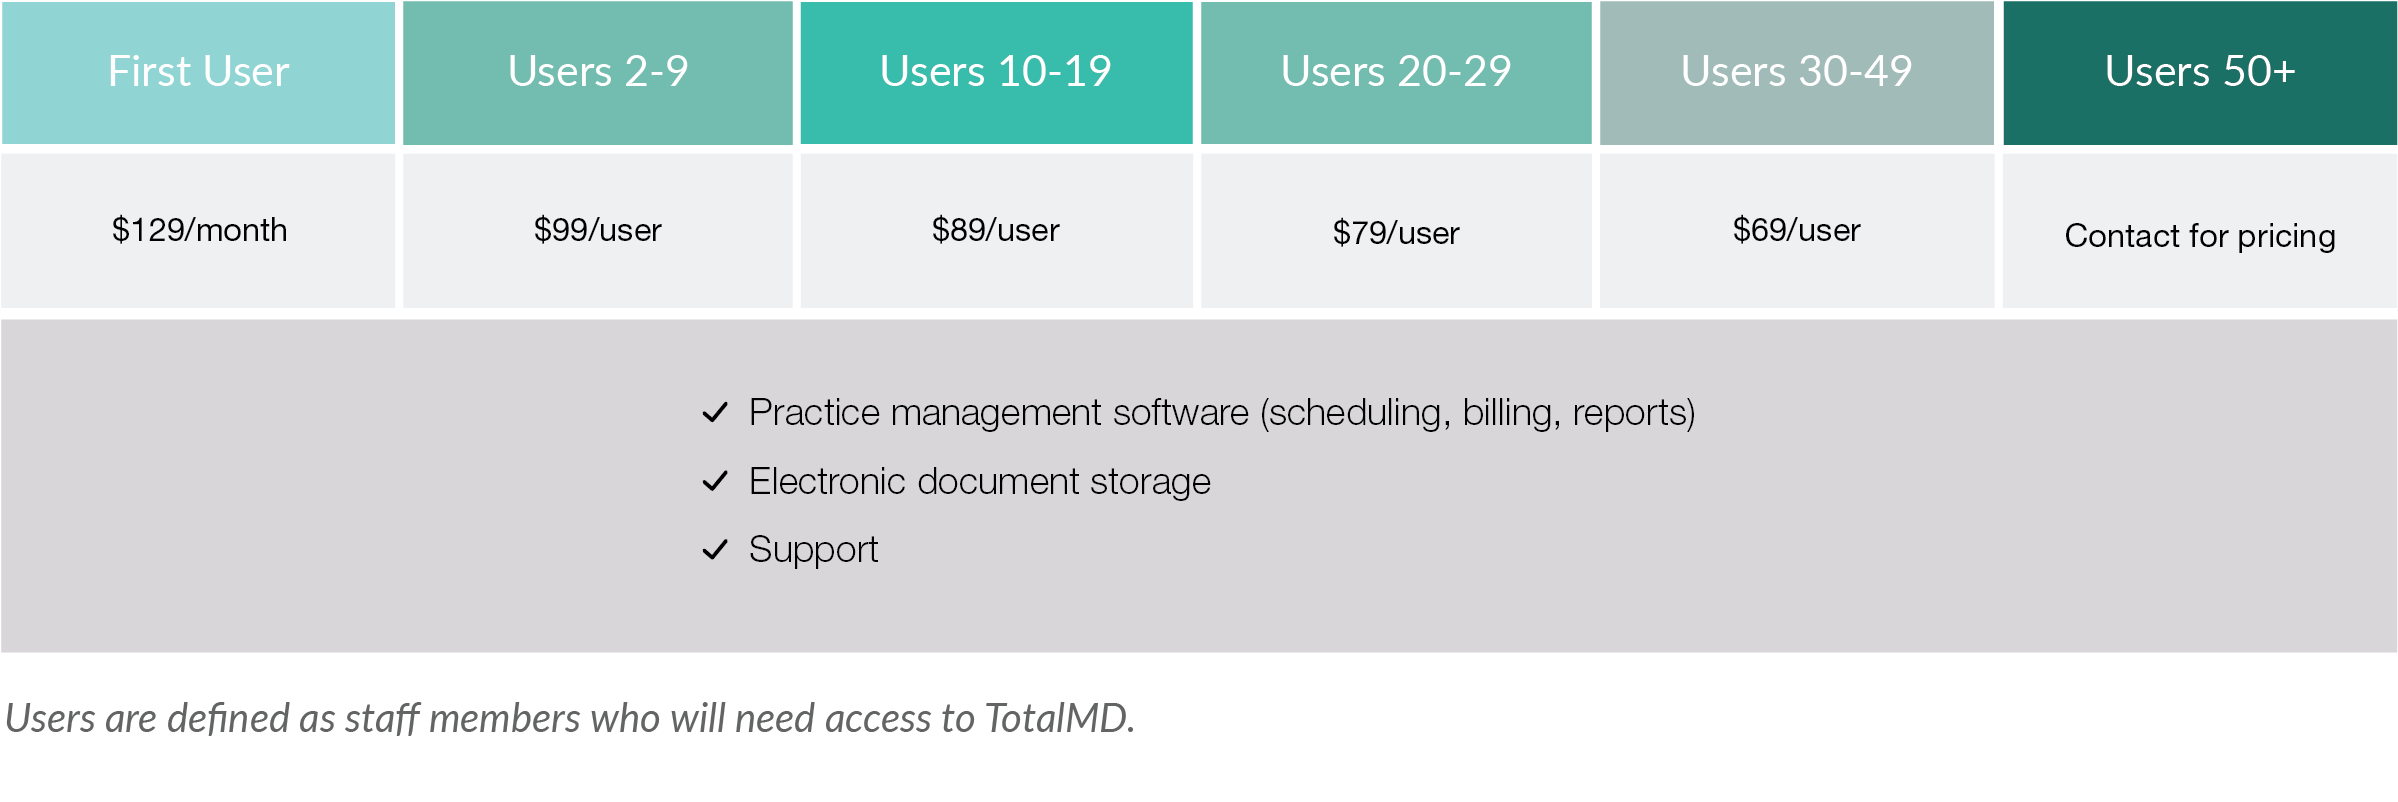 cloud software pricing